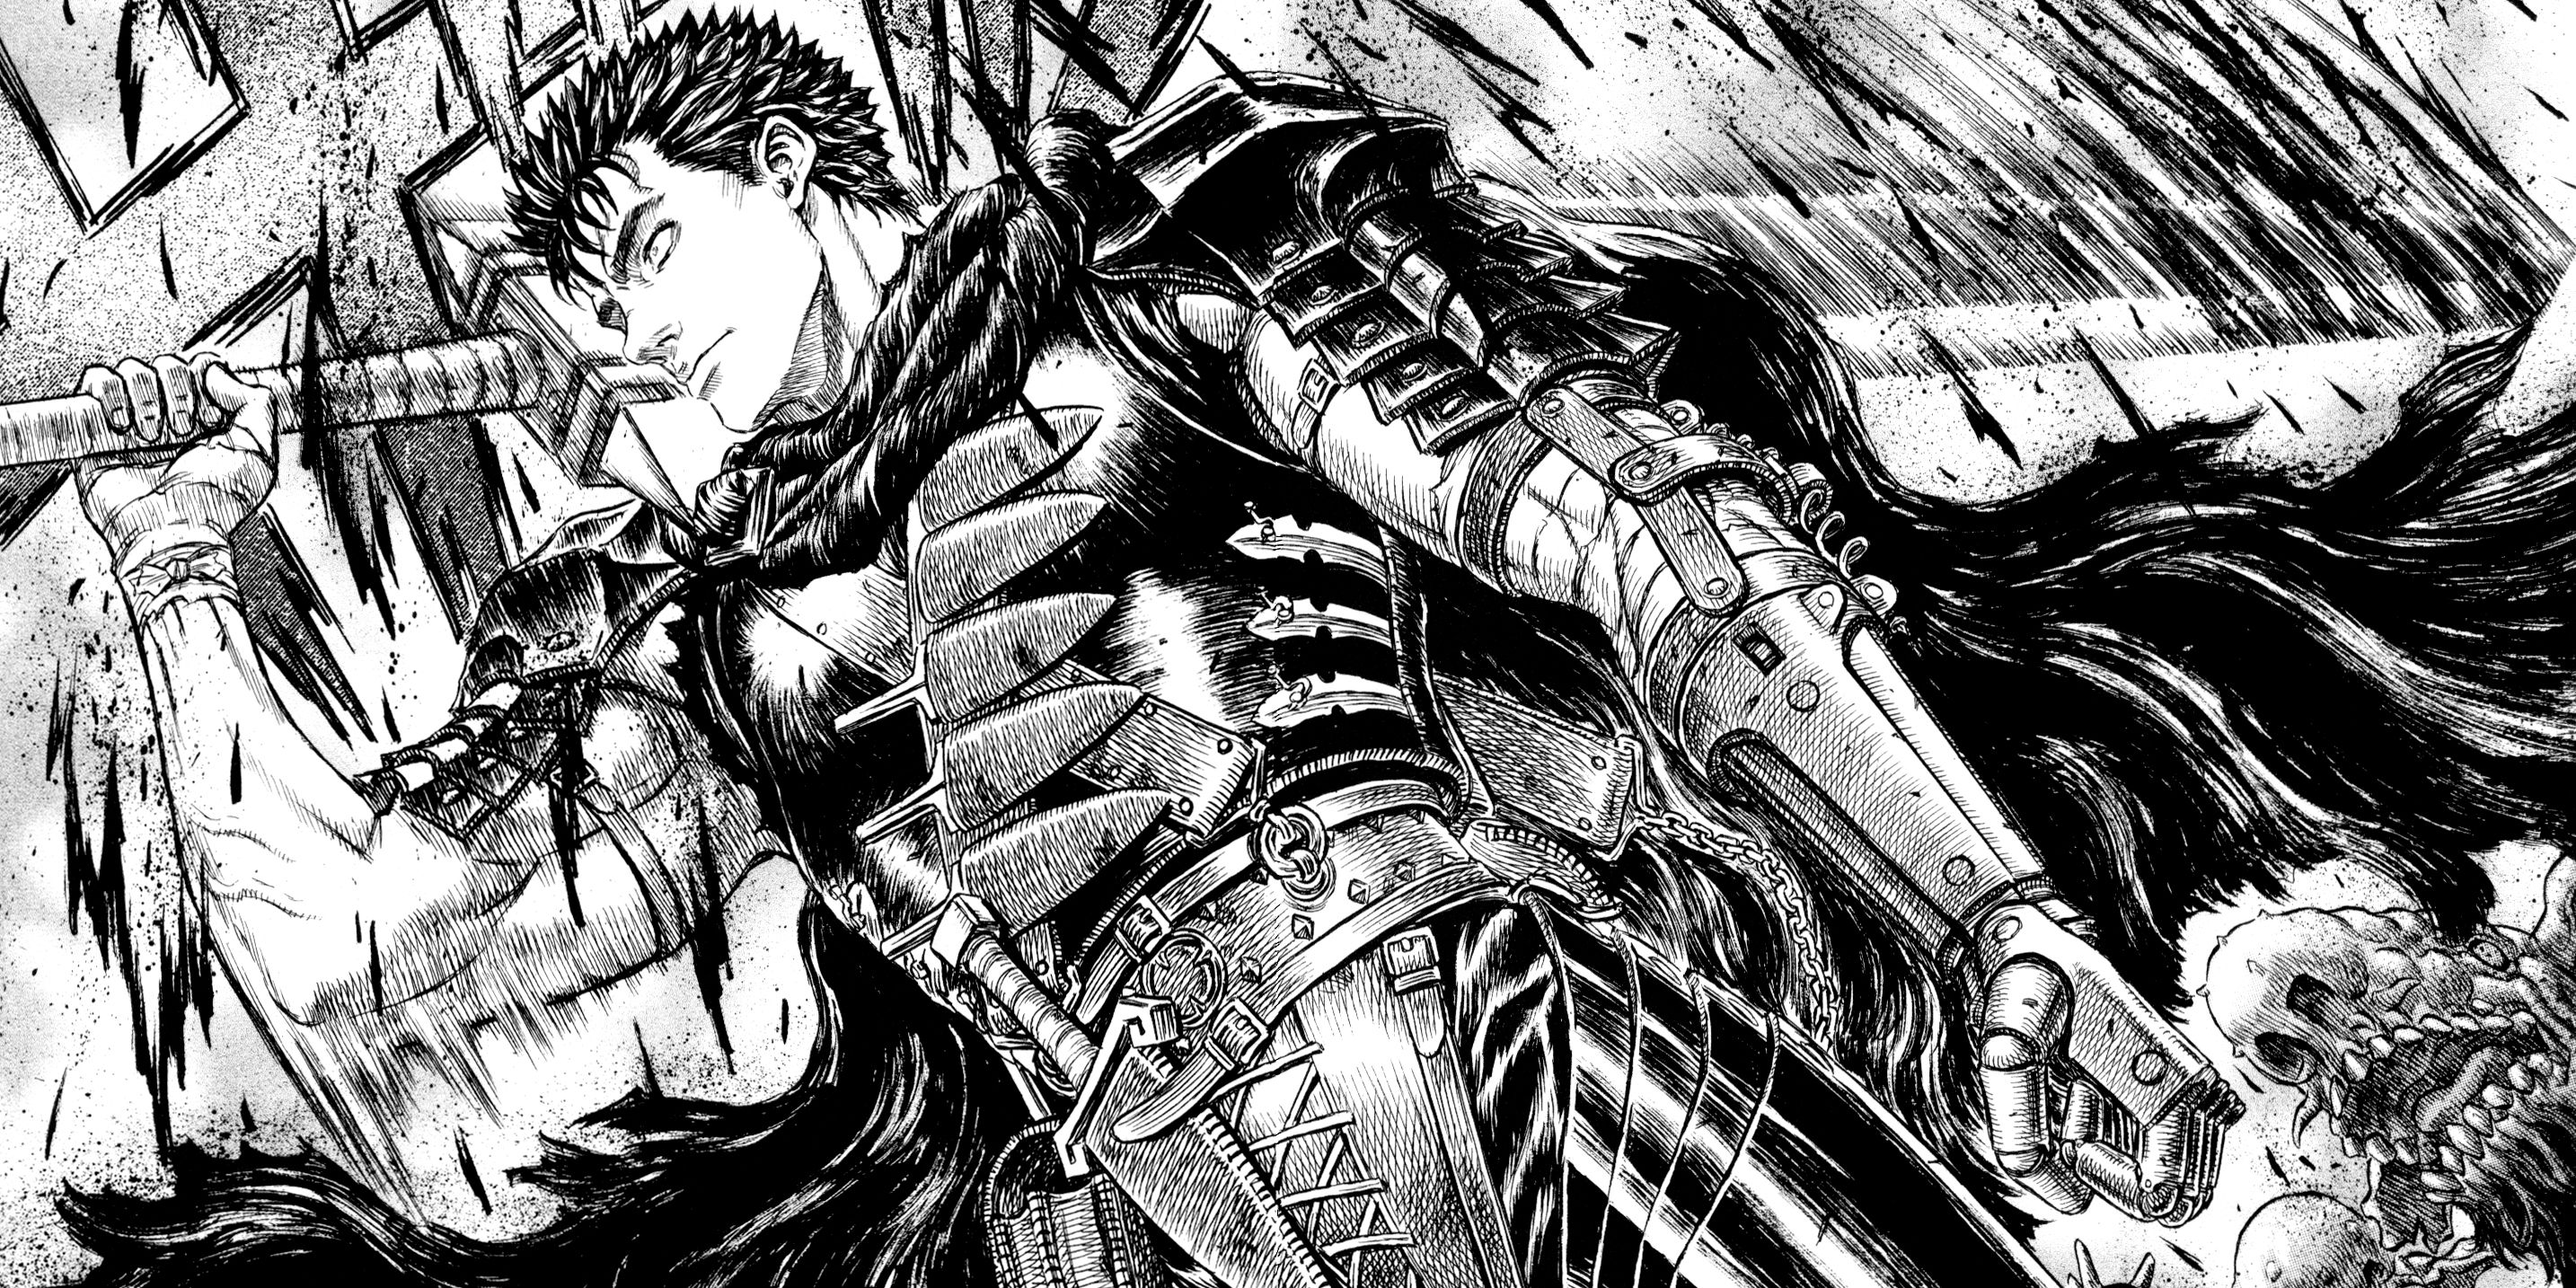 Berserk Where (& How) to Catch Up With the Manga & Anime